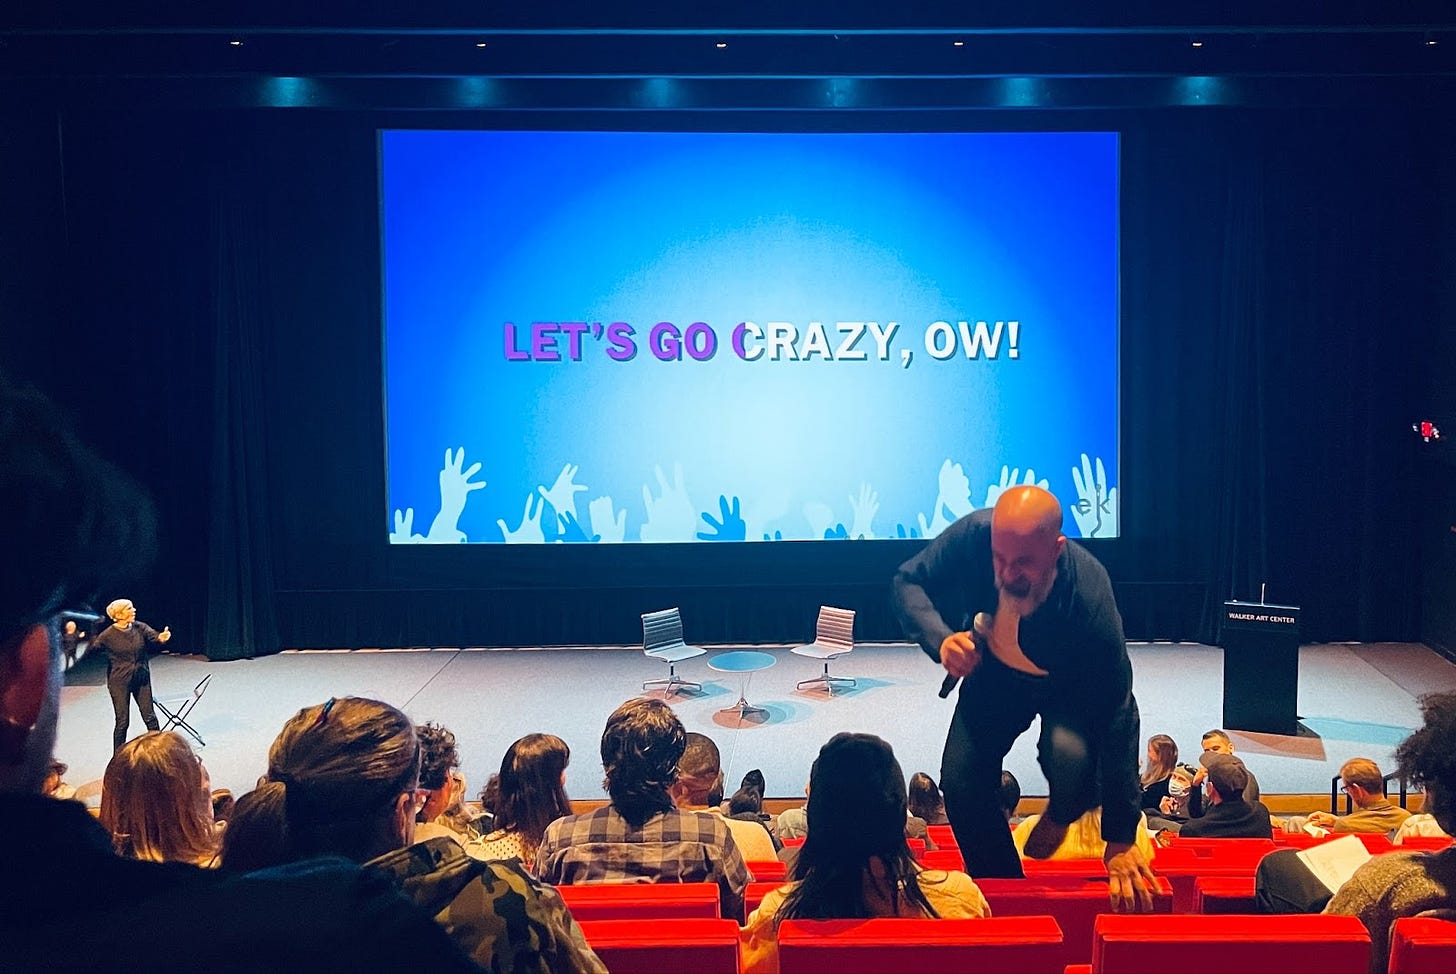 Large-scale auditorium with projection screen showing karaoke-style text, "LET'S GO CRAZY, OW!" Meanwhile, a bald, bearded man with a wireless microphone jumps over the audiences' seats as they look on, surprised.